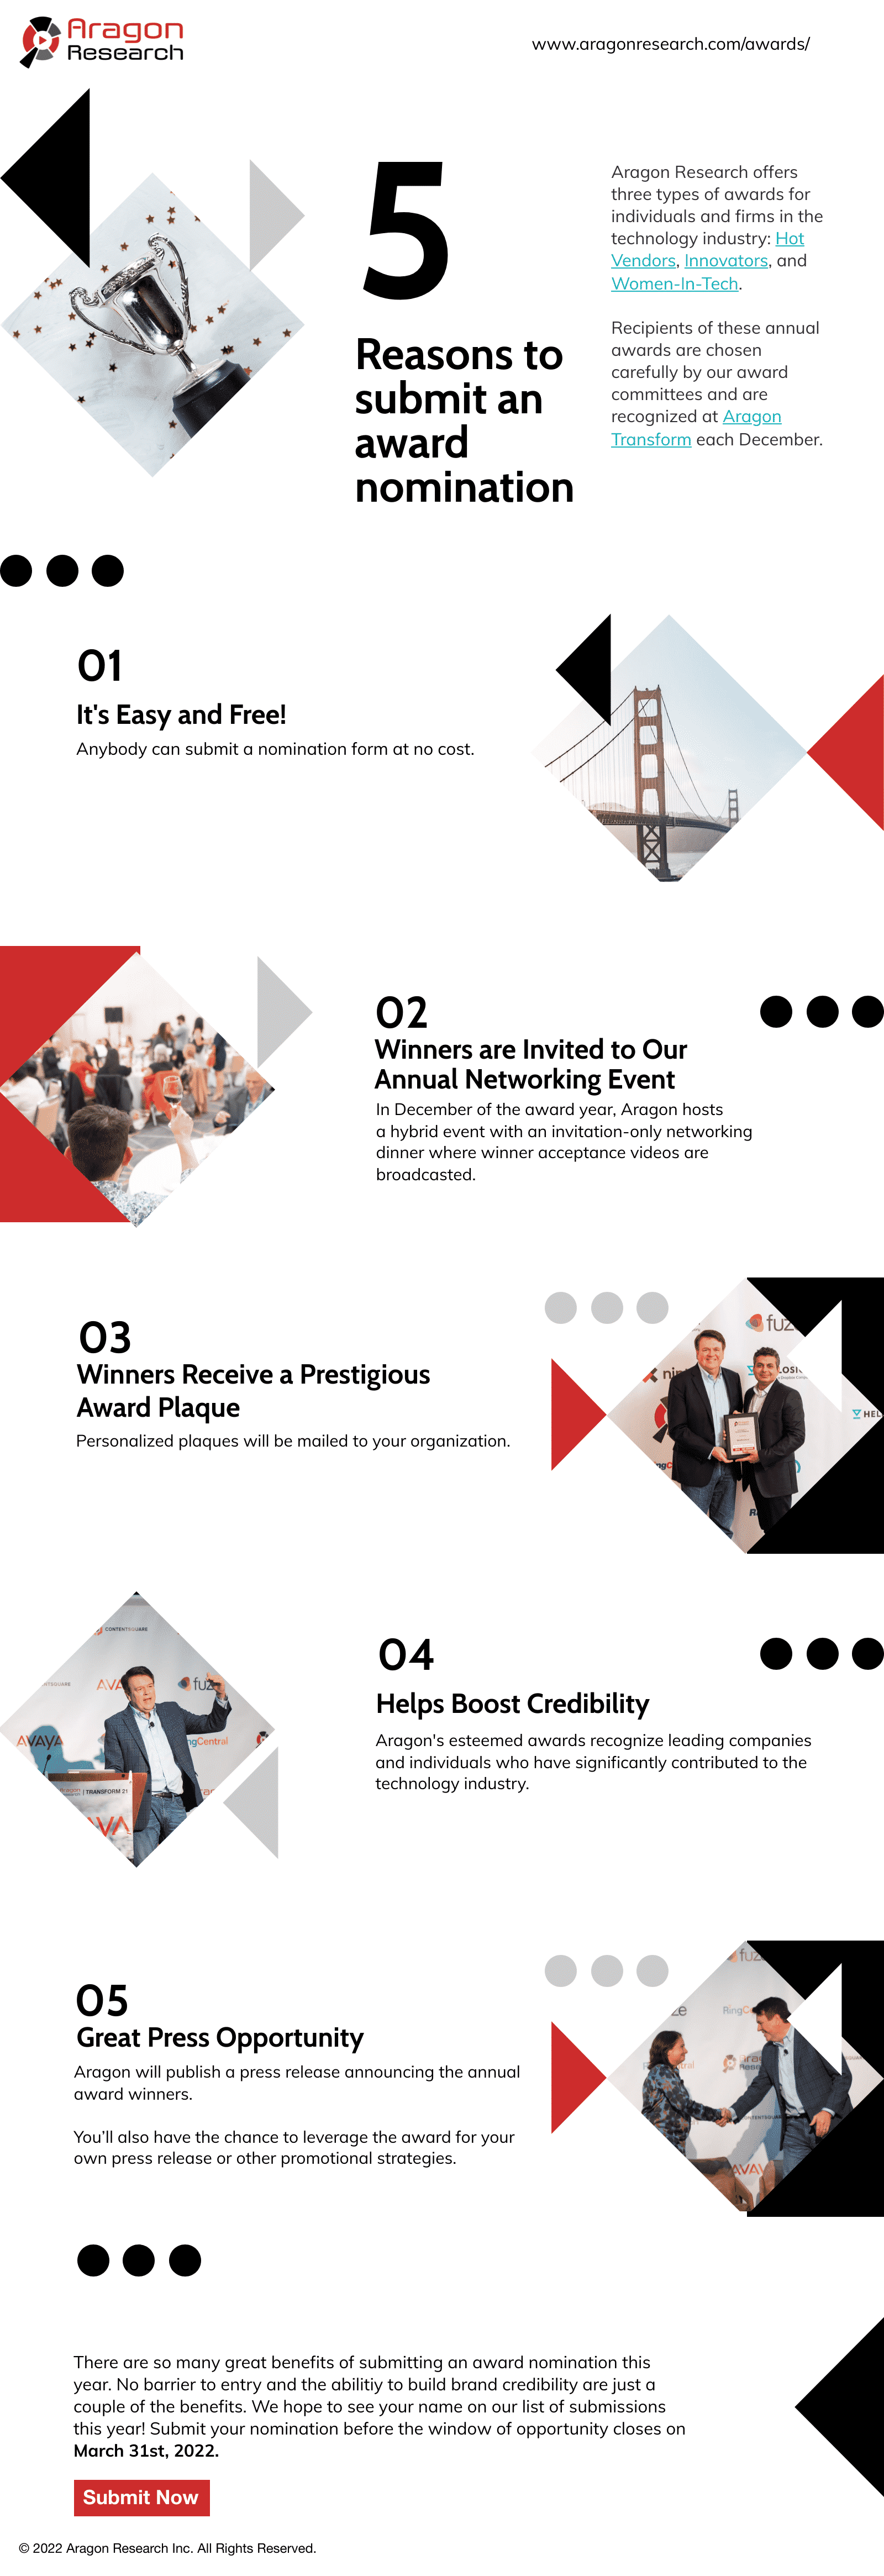 reasons to subm 57857230 1 1 - [Infographic] 5 Reasons to Submit an Award Nomination